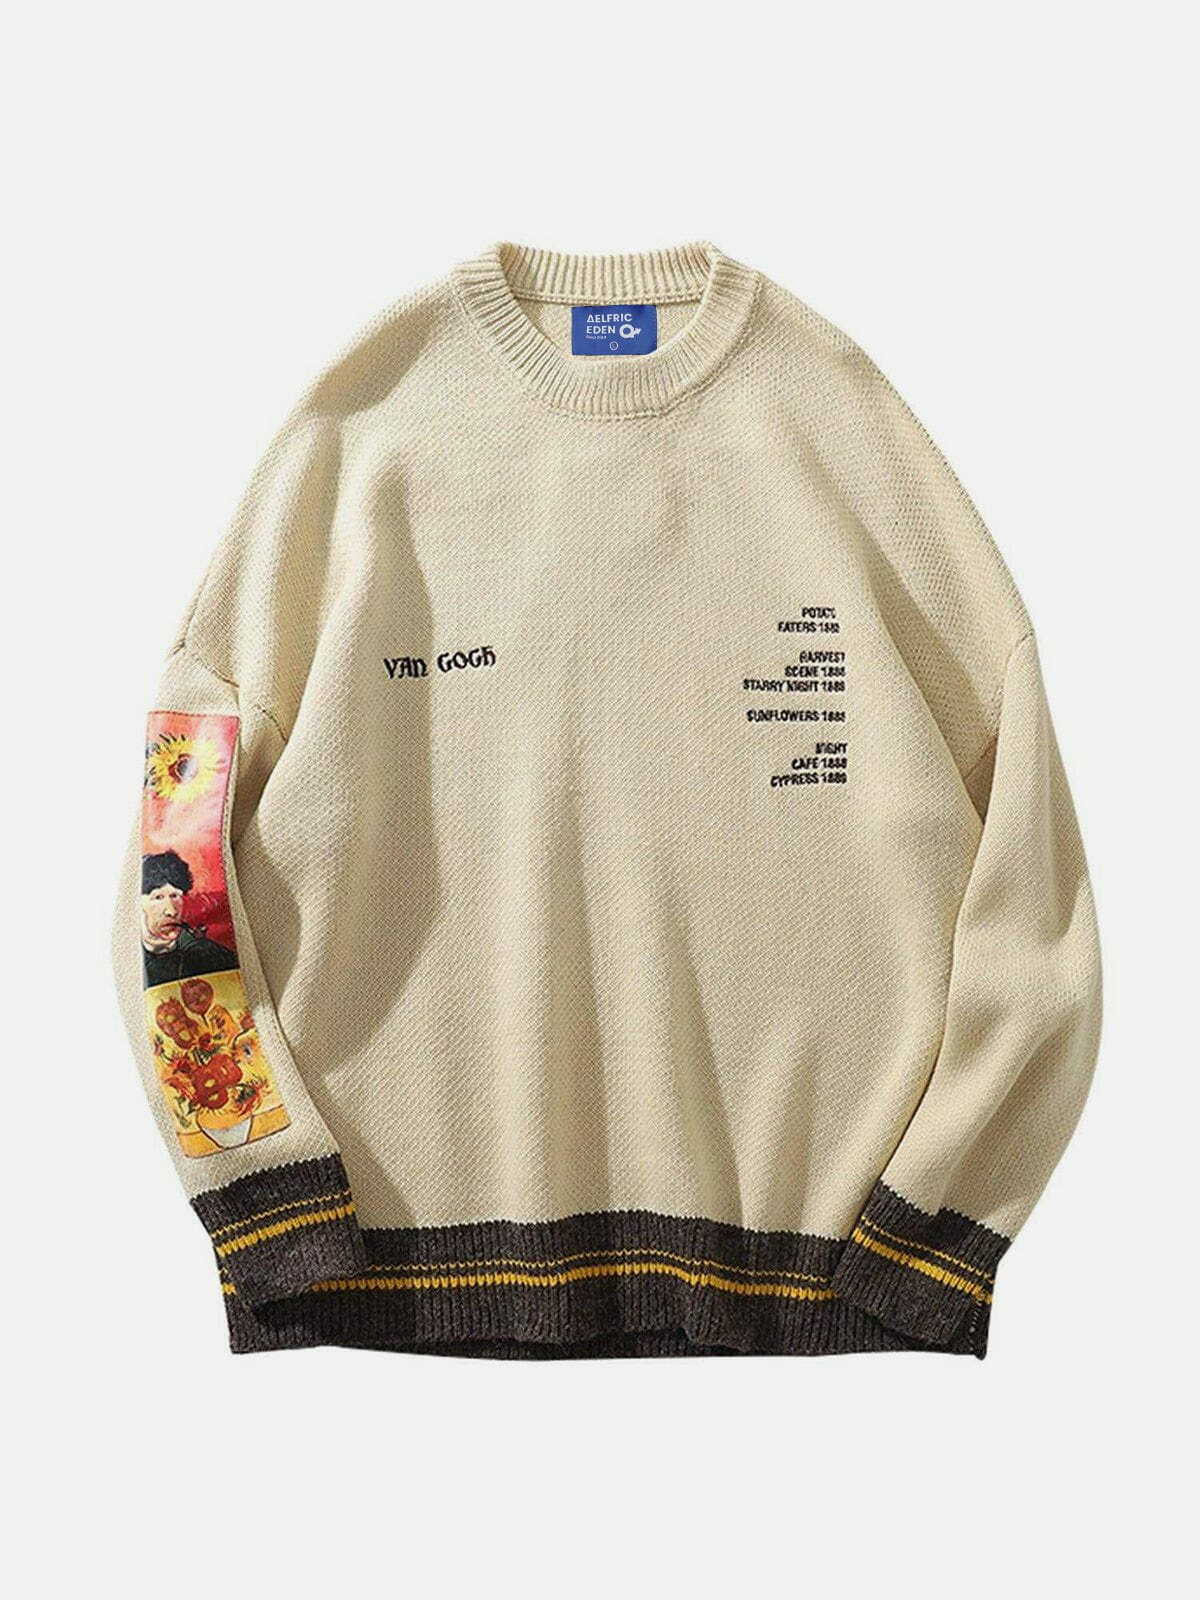 iconic van gogh sunflowers sweater   youthful artistic flair 7680